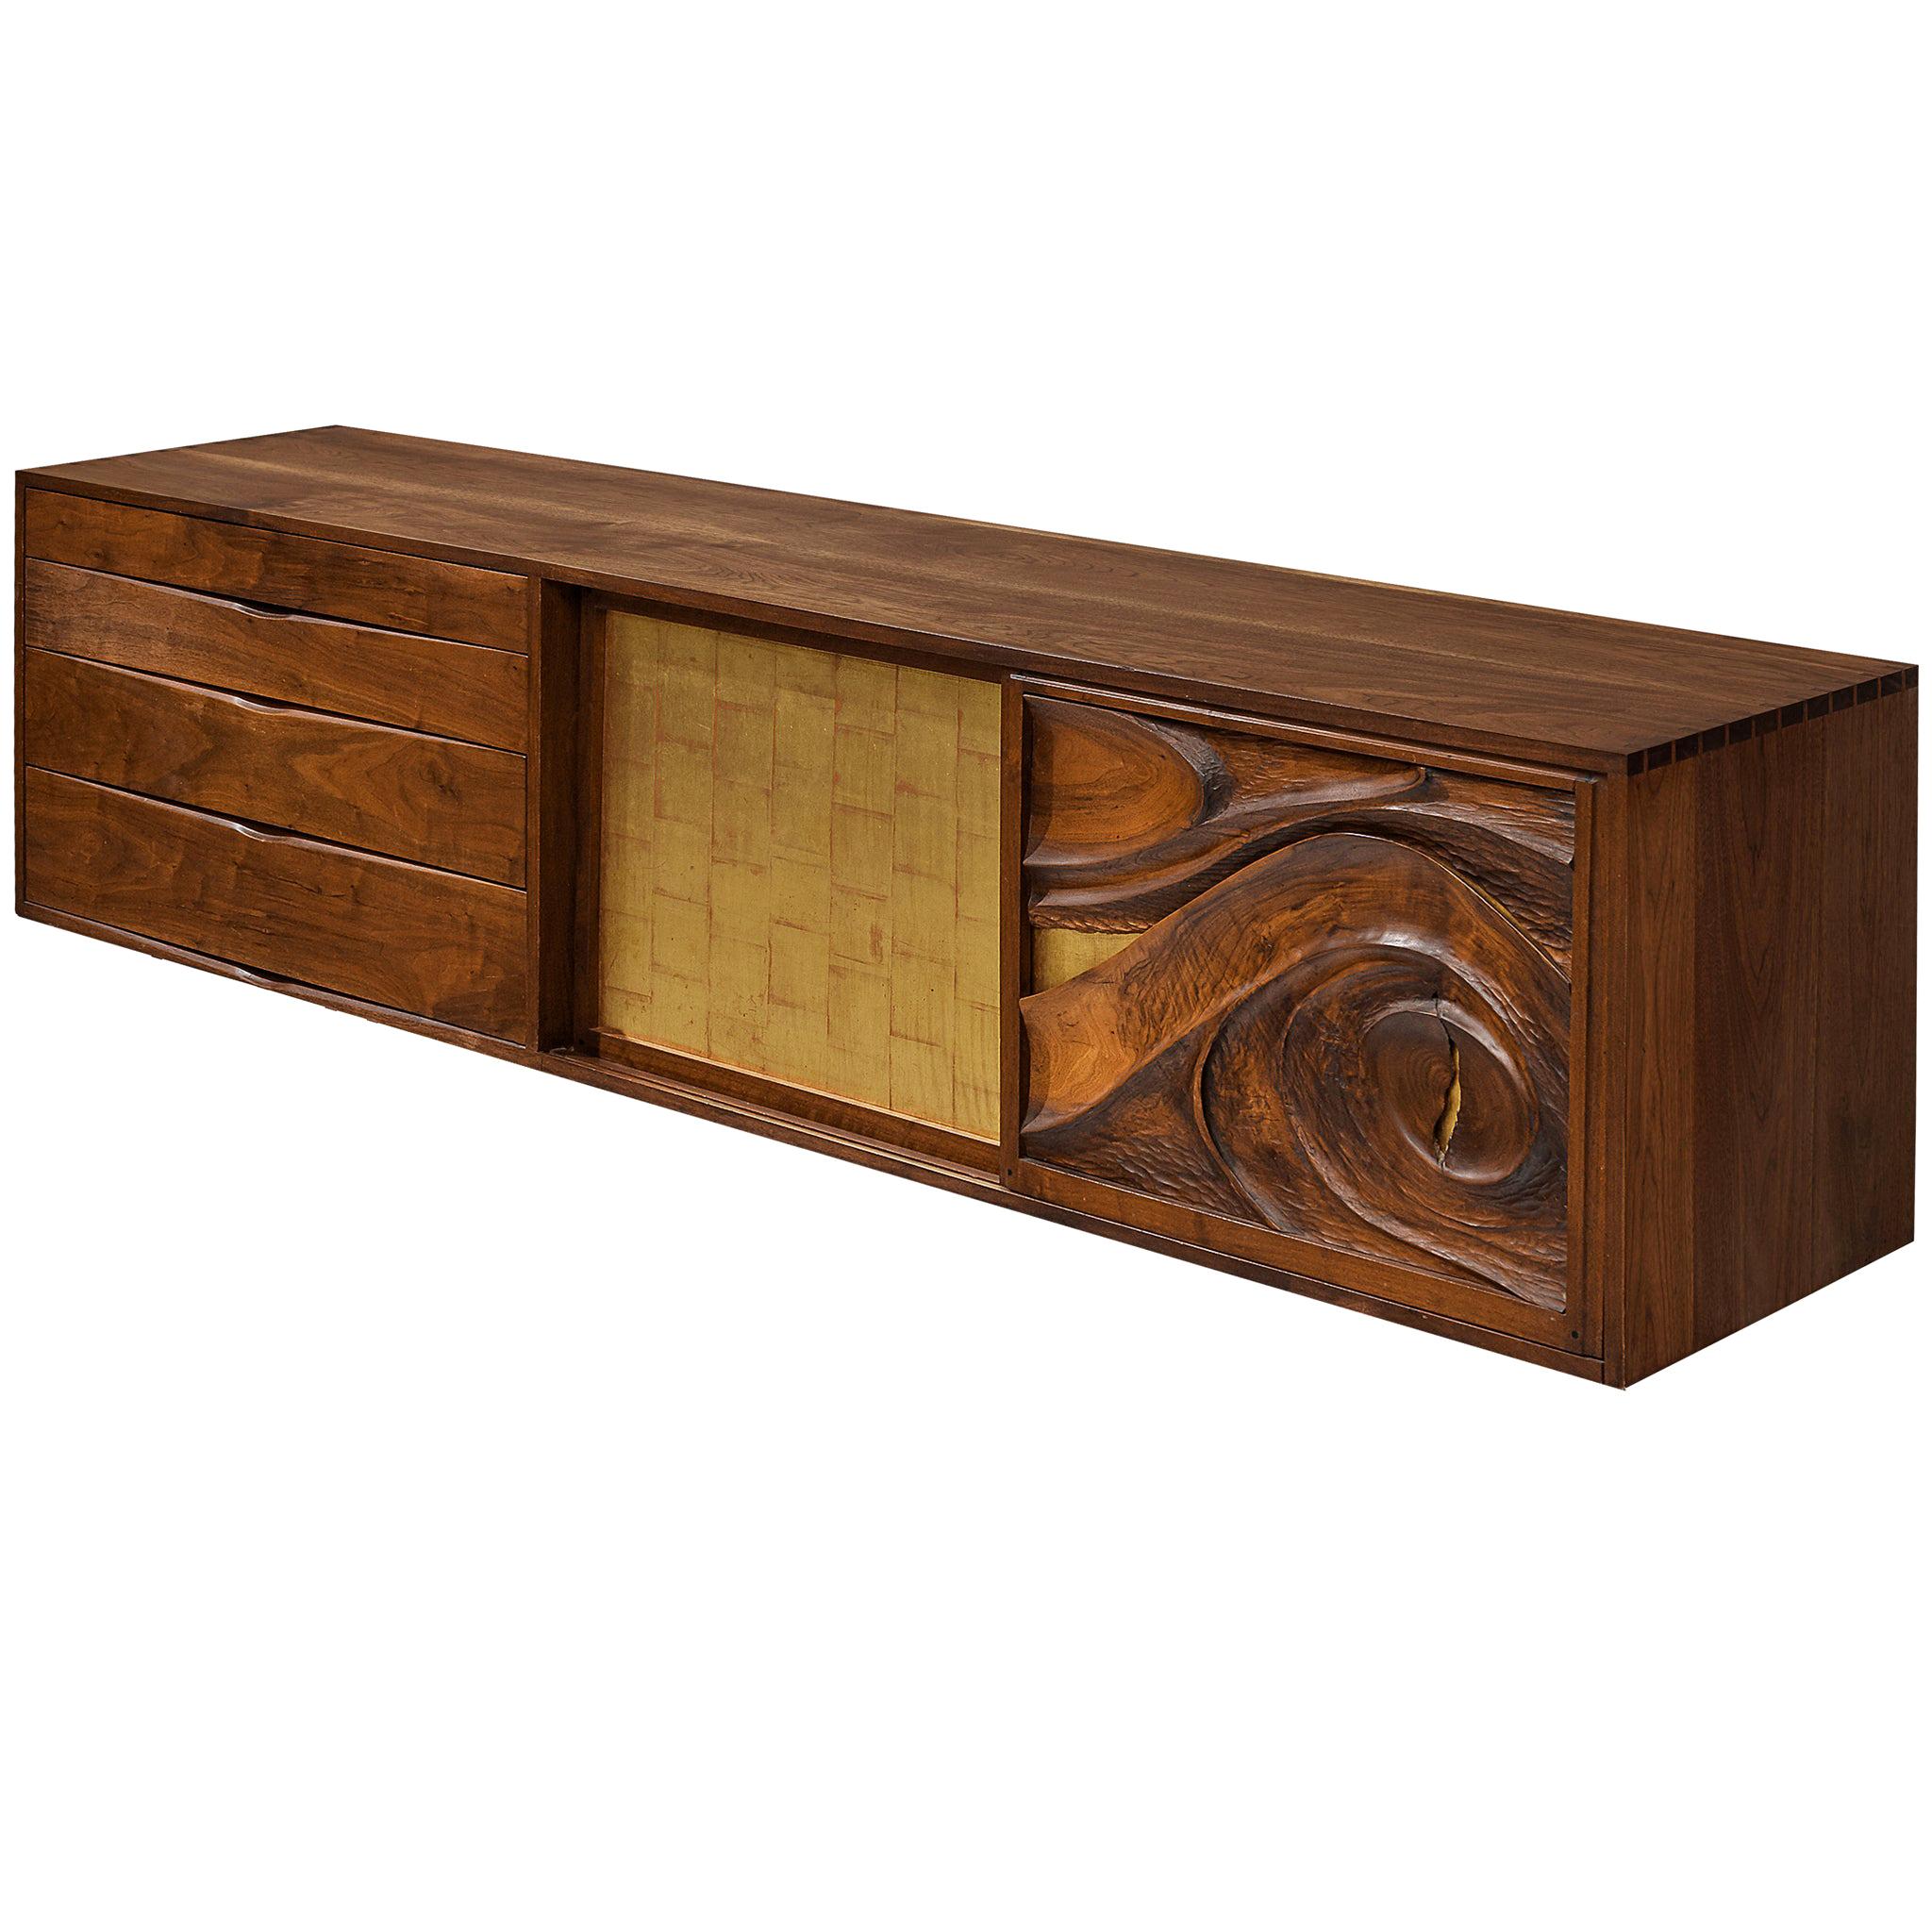 Phillip Lloyd Powell Wall-Mounted Cabinet in Walnut with Gold Leaf